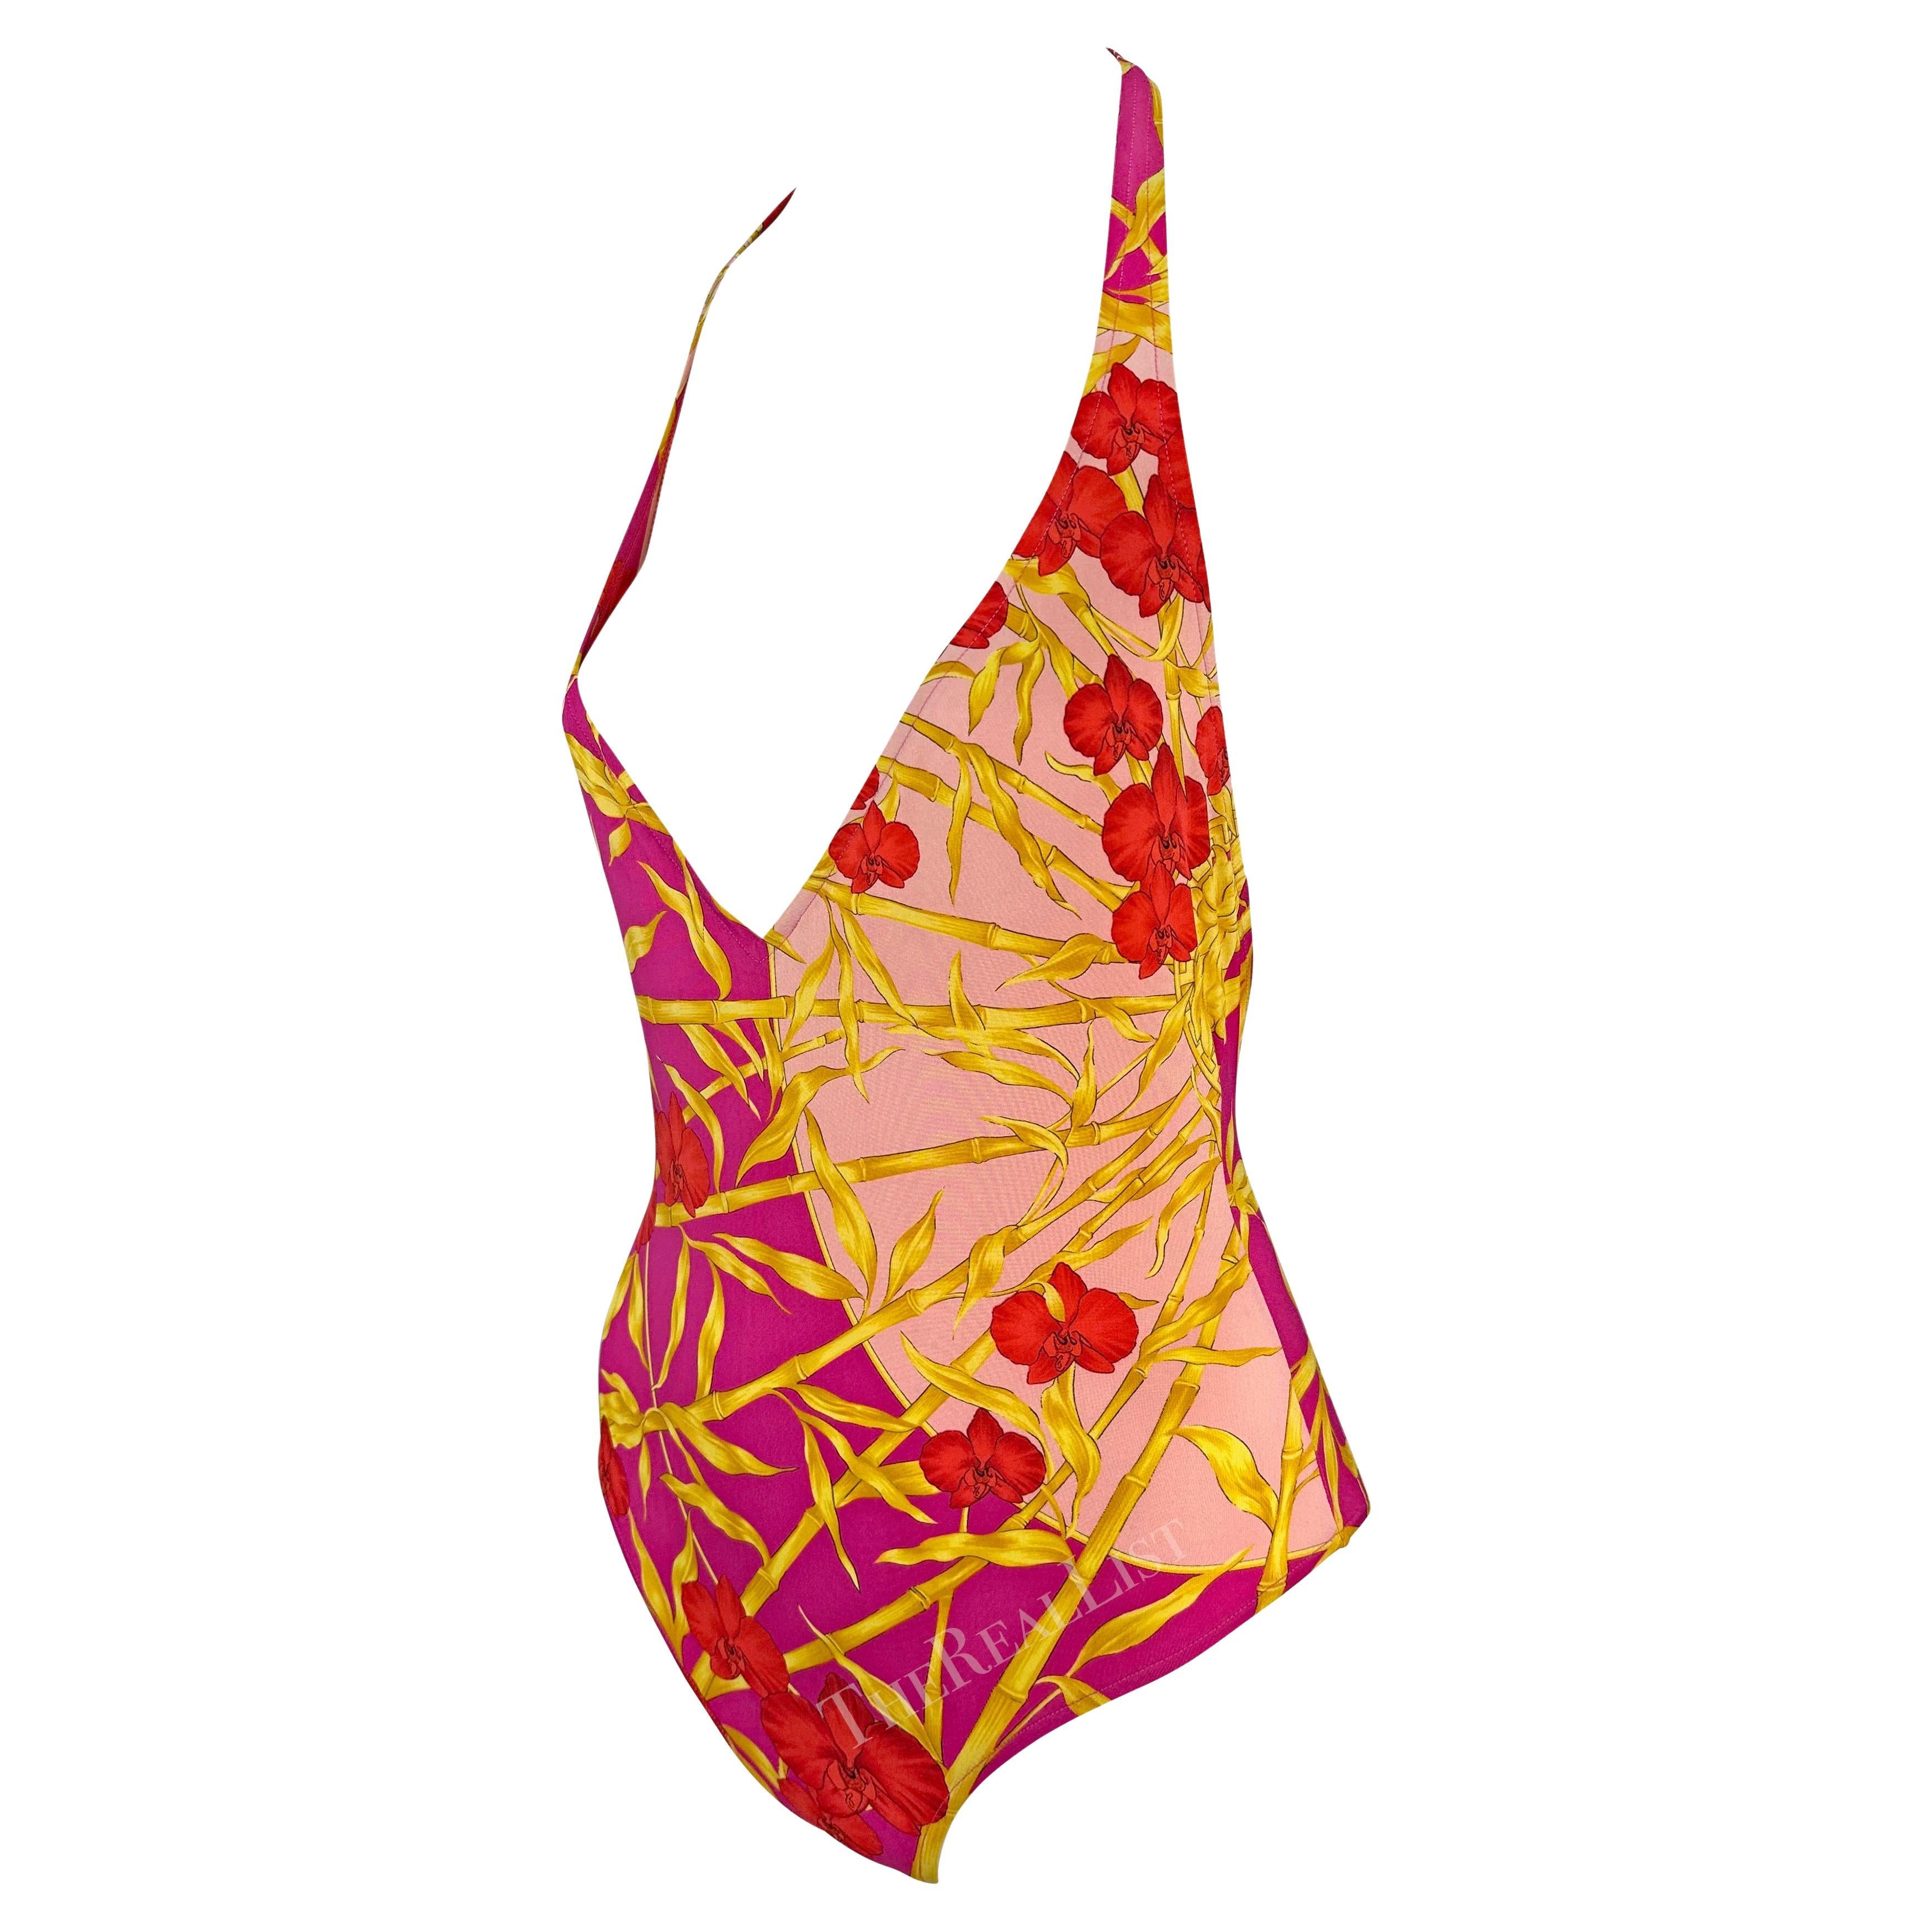 Presenting a pink jungle print Gianni Versace one-piece swimsuit, designed by Donatella Versace. From the Spring/Summer 2000 collection, the same collection as the infamous green JLo dress, this one-piece swimsuit/bodysuit is covered in a bright